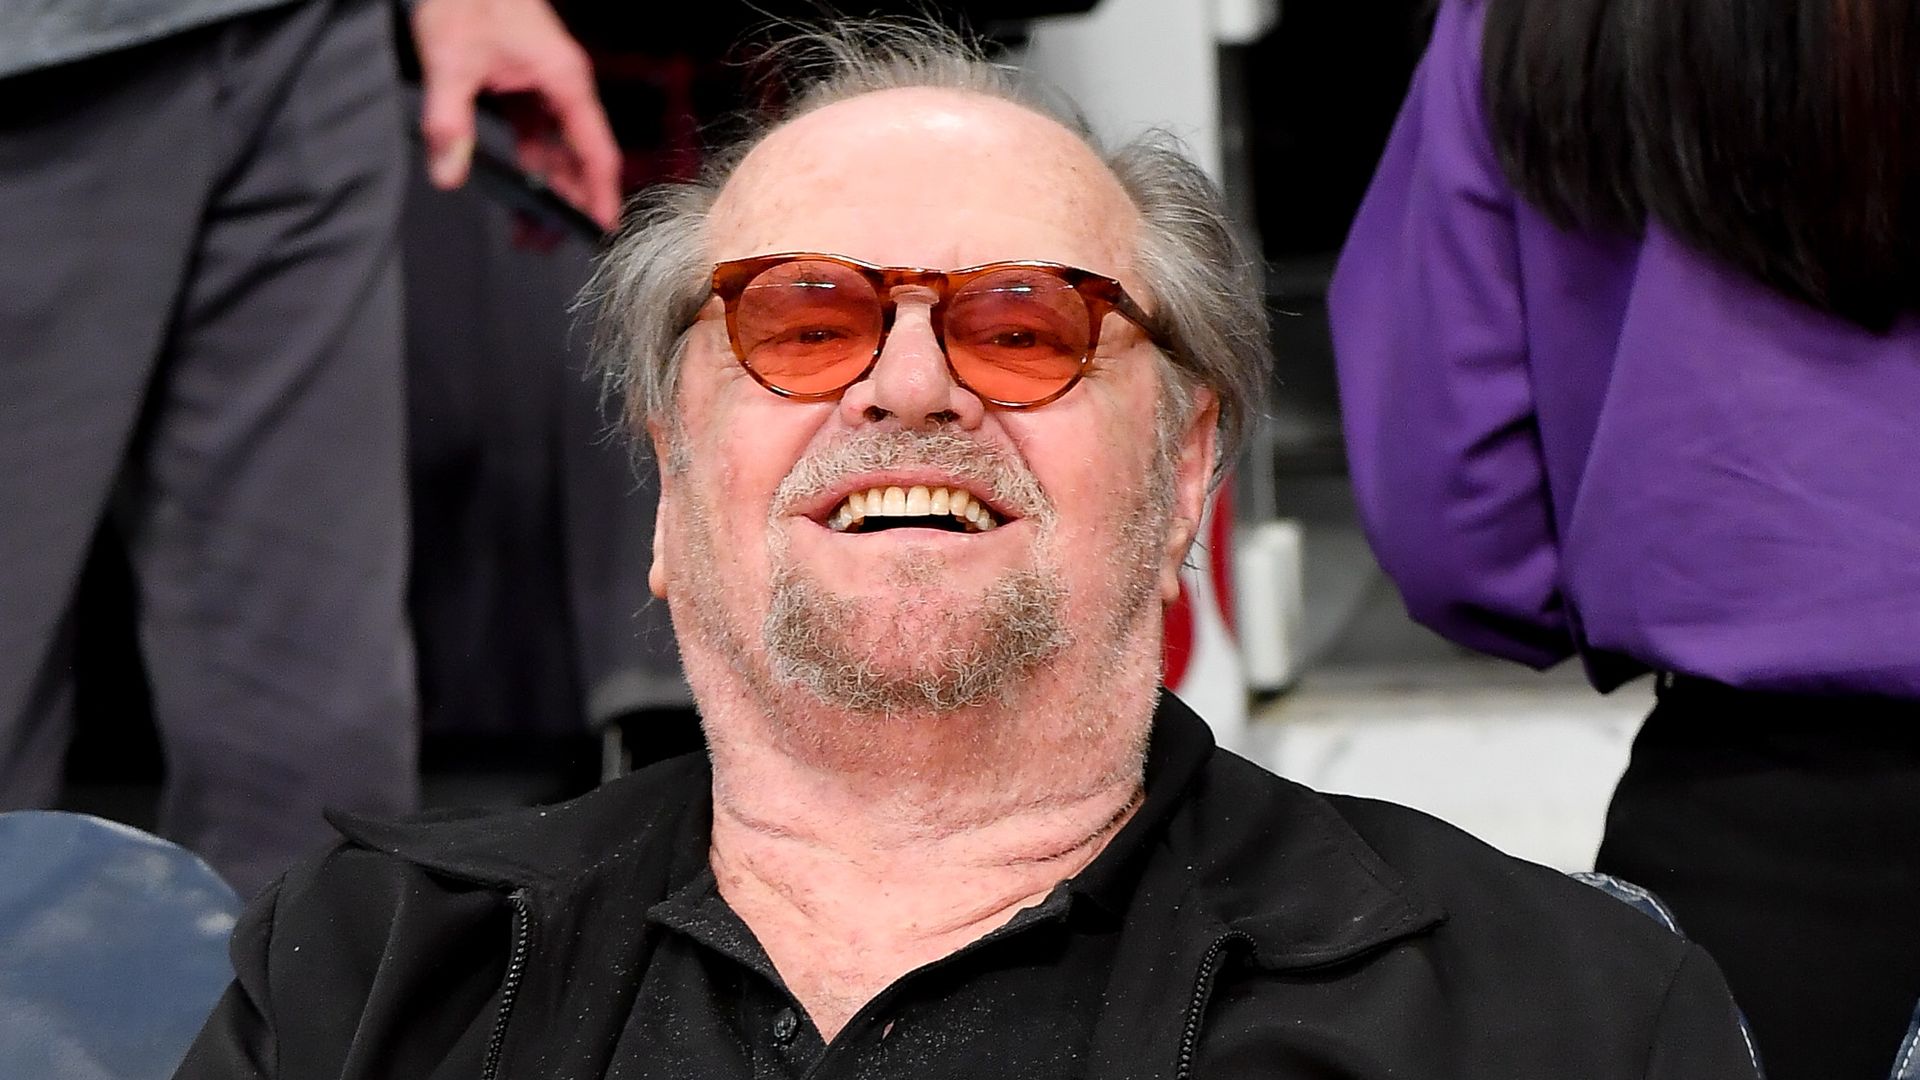 Jack Nicholson attends a basketball game in 2020 in Los Angeles, 